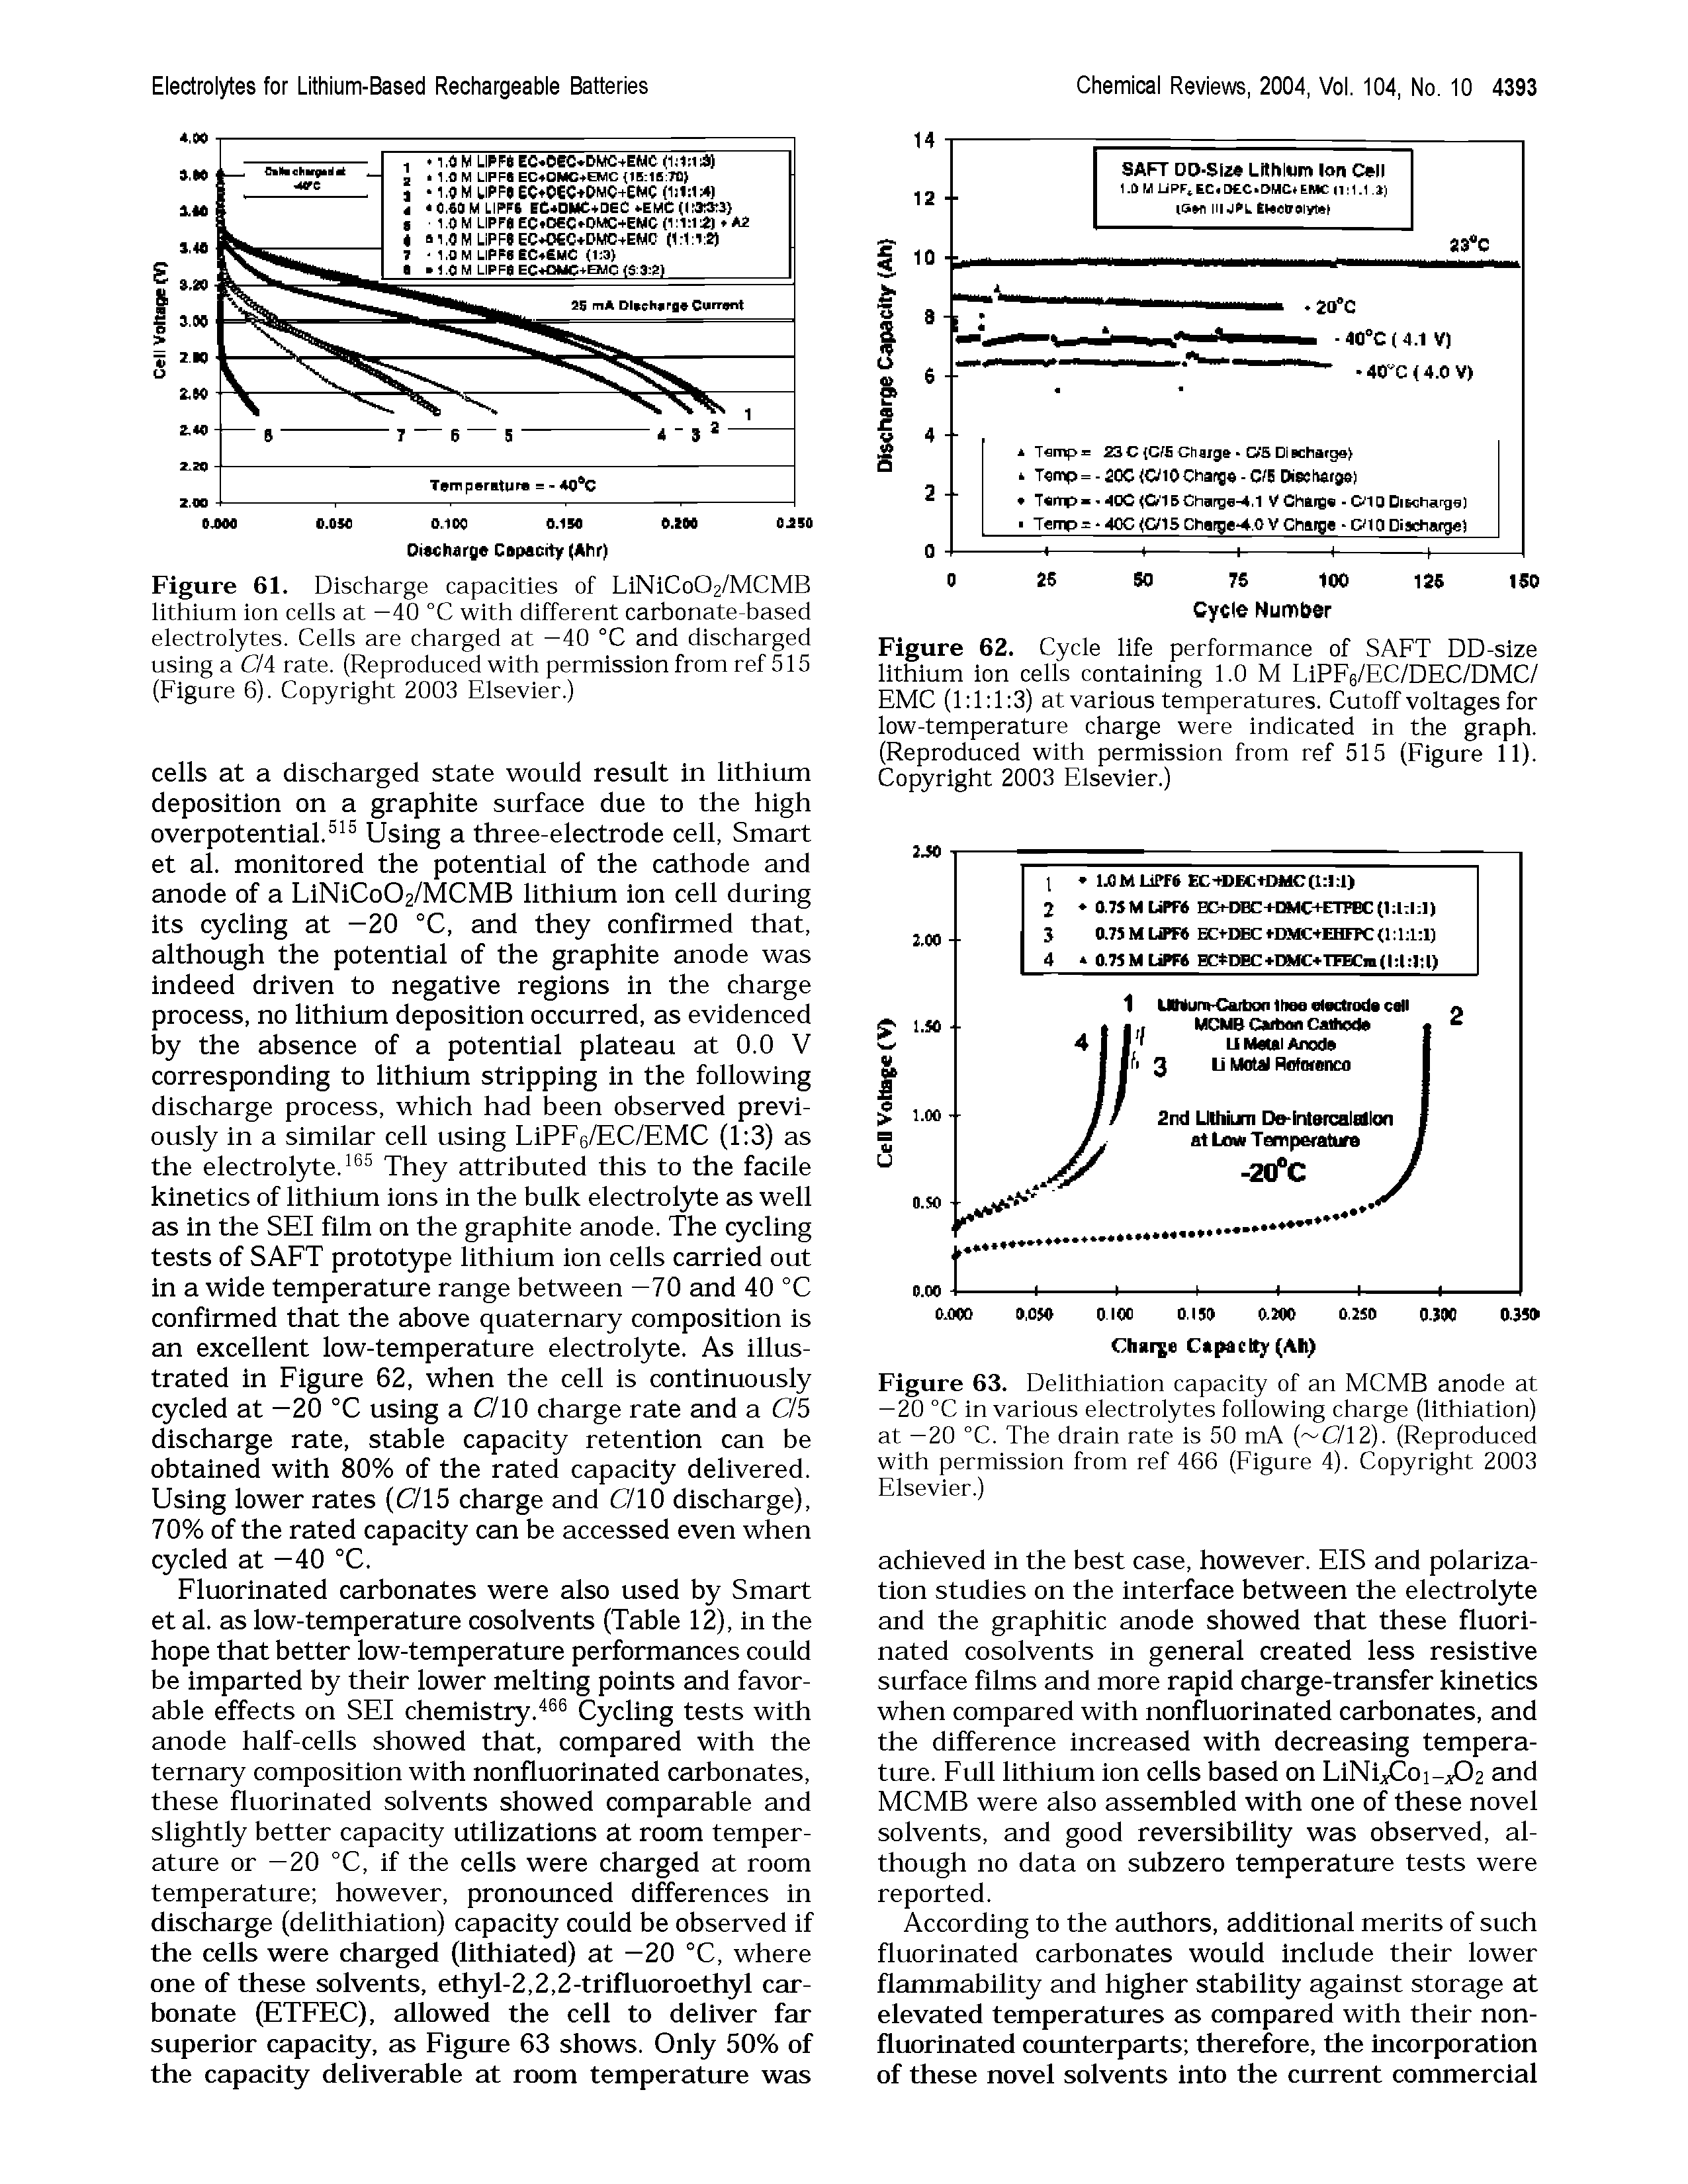 Figure 62. Cycle life performance of SAFT DD-size lithium ion cells containing 1.0 M LiPFe/EC/DEC/DMC/ EMC (1 1 1 3) at various temperatures. Cutoff voltages for low-temperature charge were indicated in the graph. (Reproduced with permission from ref 515 (Figure 11). Copyright 2003 Elsevier.)...